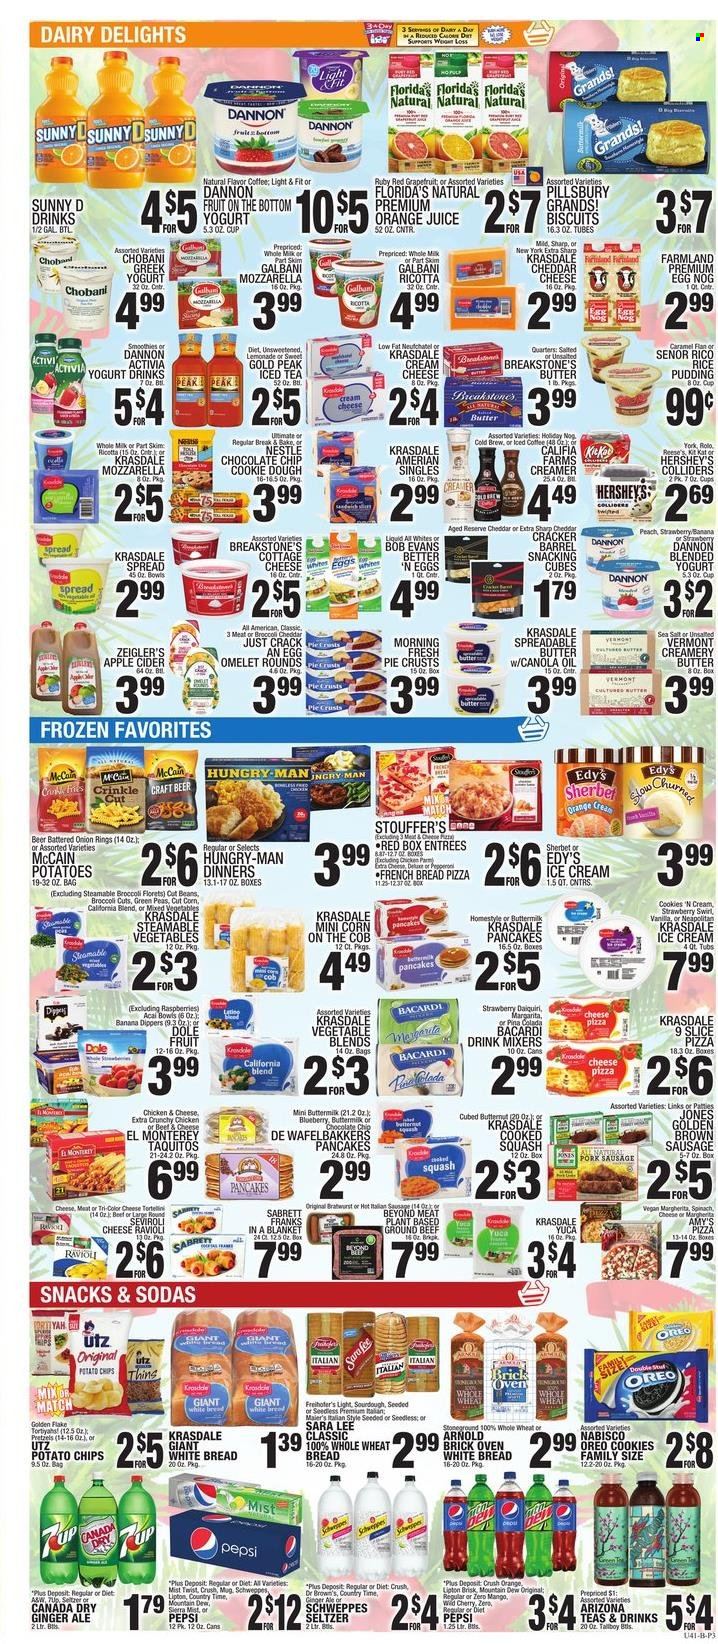 thumbnail - C-Town Flyer - 12/24/2021 - 12/30/2021 - Sales products - wheat bread, white bread, pretzels, pie, Sara Lee, french bread, broccoli, corn, Dole, pears, ravioli, pizza, onion rings, pancakes, Pillsbury, taquitos, Bob Evans, bratwurst, pork sausage, pepperoni, cottage cheese, cream cheese, ricotta, Galbani, greek yoghurt, Oreo, Activia, Chobani, Dannon, rice pudding, buttermilk, yoghurt drink, spreadable butter, creamer, ice cream, Reese's, Hershey's, Stouffer's, McCain, cookies, Nestlé, KitKat, crackers, biscuit, Florida's Natural, potato chips, Thins, pie crust, caramel, canola oil, oil, Canada Dry, ginger ale, lemonade, Mountain Dew, Schweppes, Pepsi, orange juice, juice, Lipton, ice tea, Diet Pepsi, 7UP, AriZona, Sierra Mist, Country Time, smoothie, seltzer water, coffee, apple cider, Bacardi, cider, beer, beef meat, ground beef. Page 3.